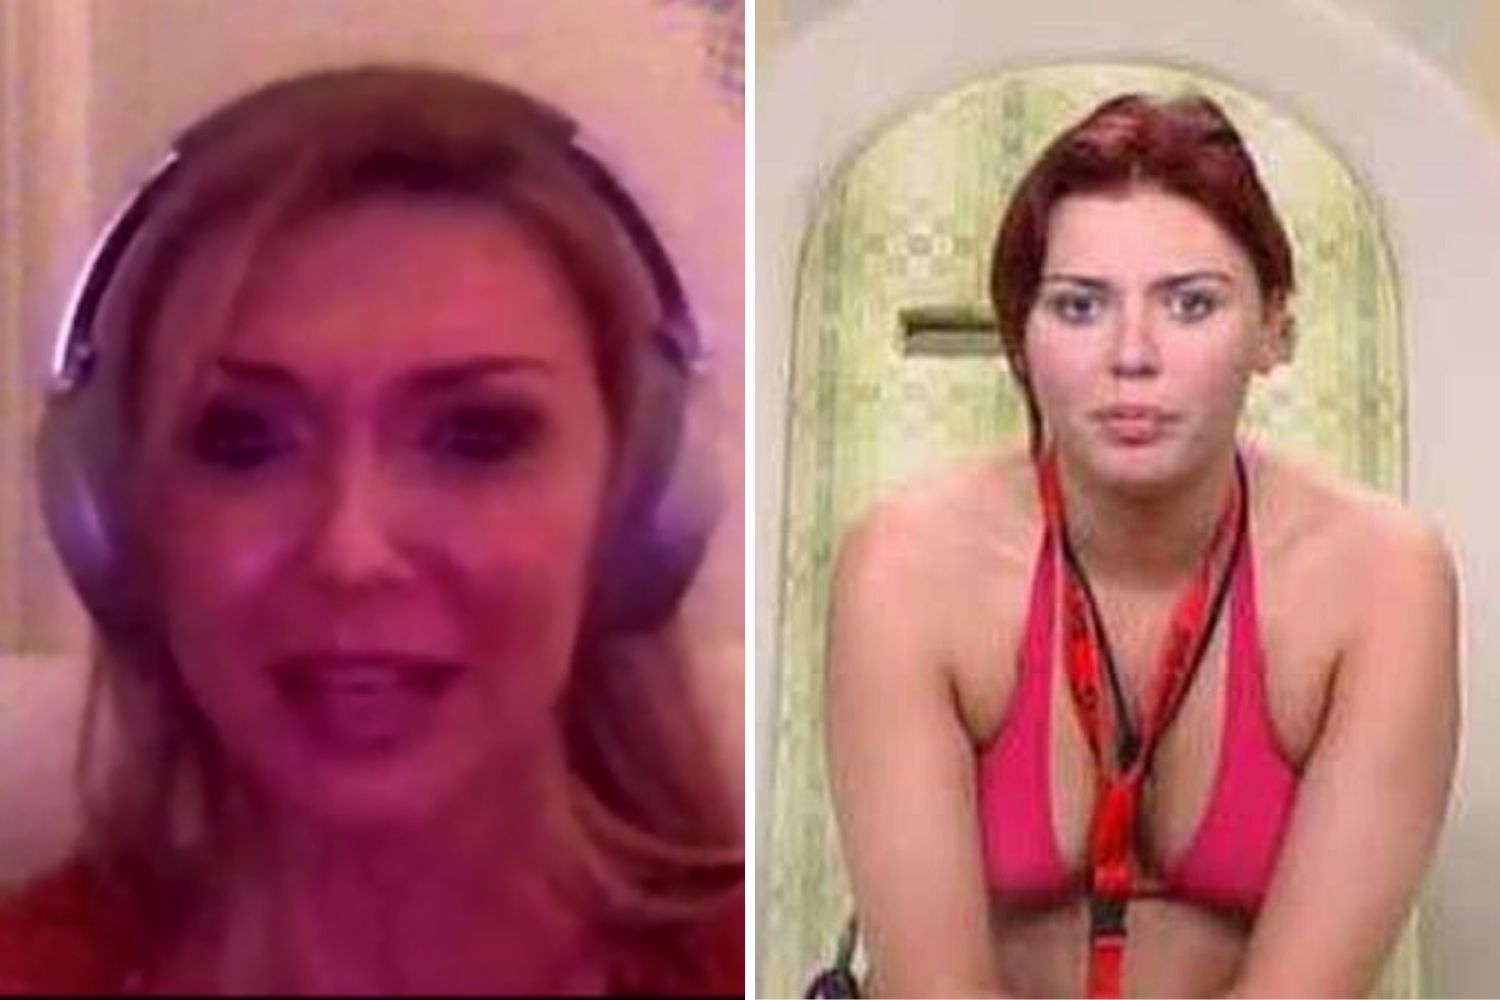 Big Brother CHEATING scandal sends fans into a frenzy 